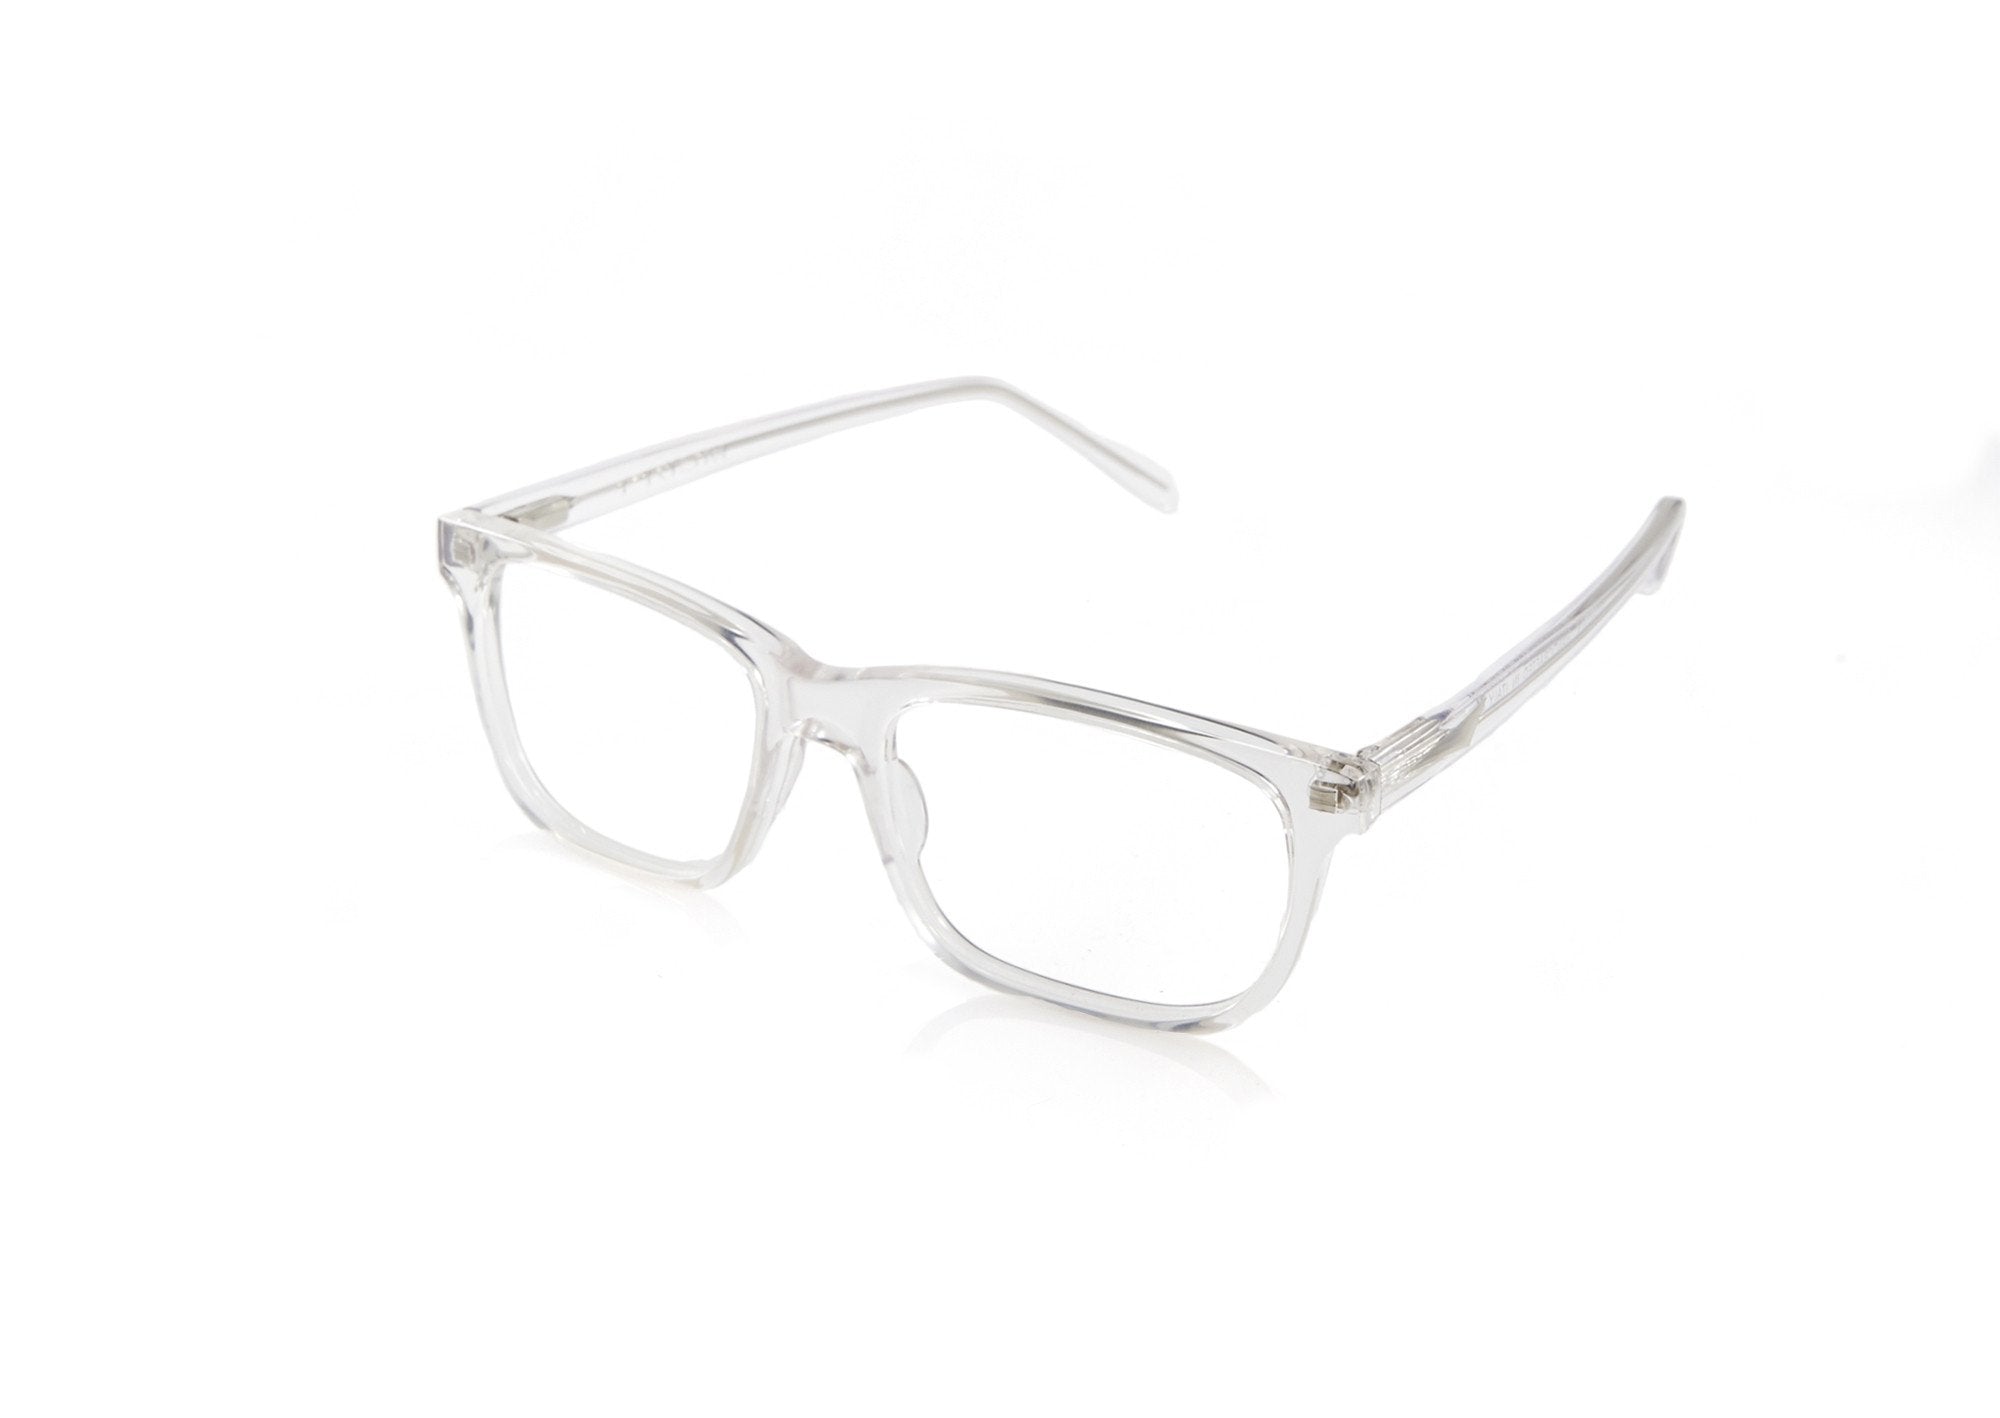 ROME Optical - Clear. The Rome is a PRISM classic. Narrow and rectangular unisex shape is ideal for everyday wear. These lightweight frames are also available in sunglasses.